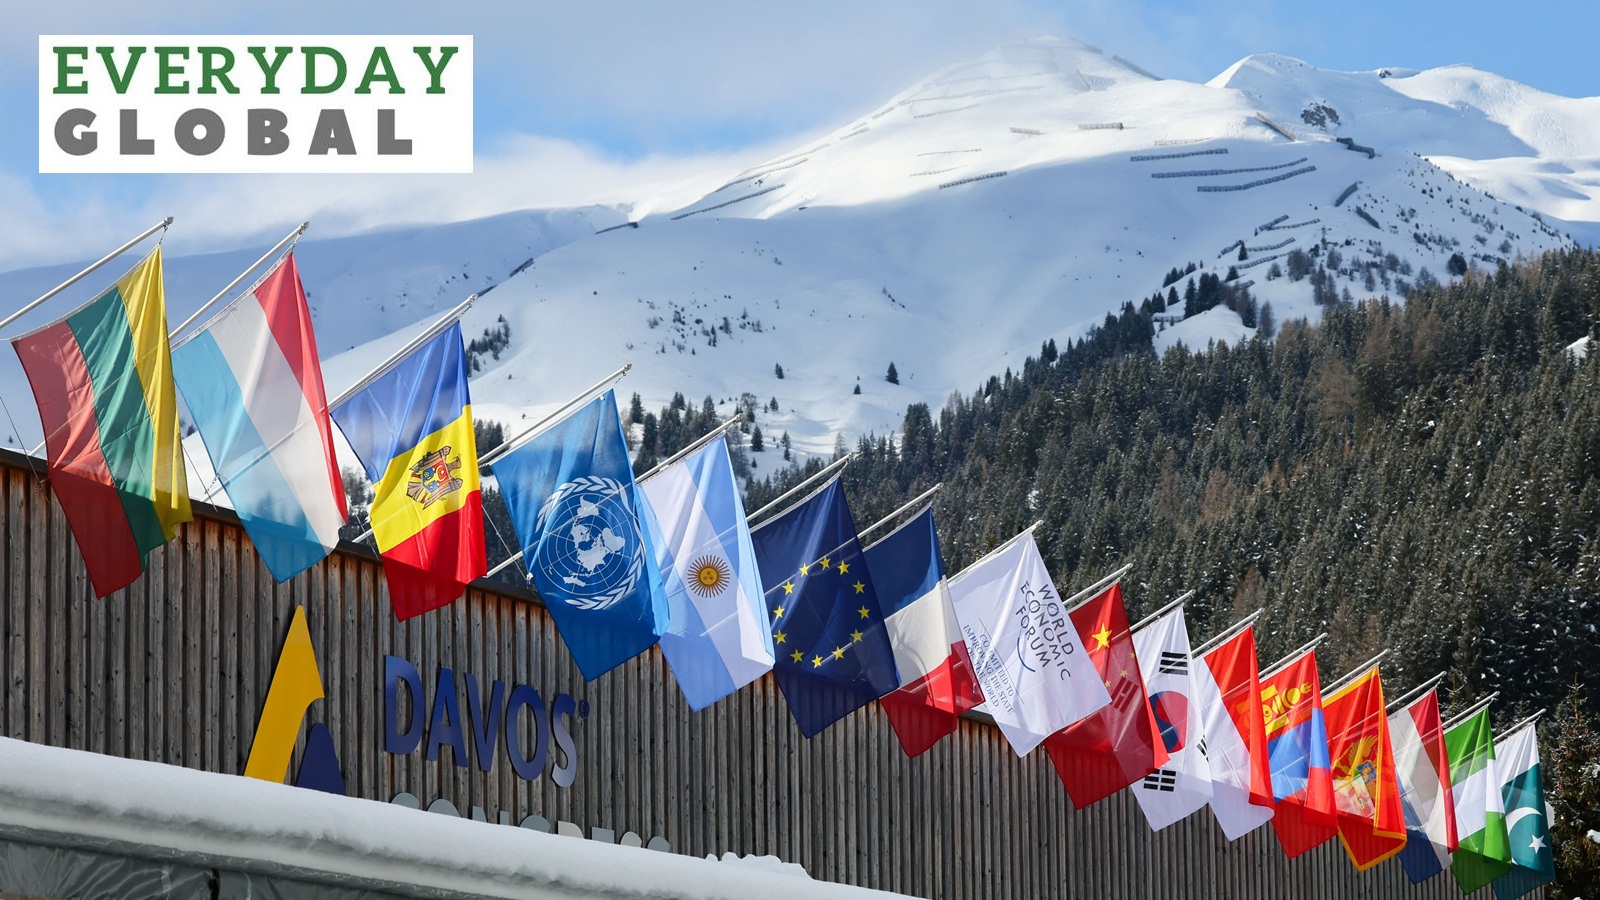 What is the World Economic Forum meeting, held annually in Davos